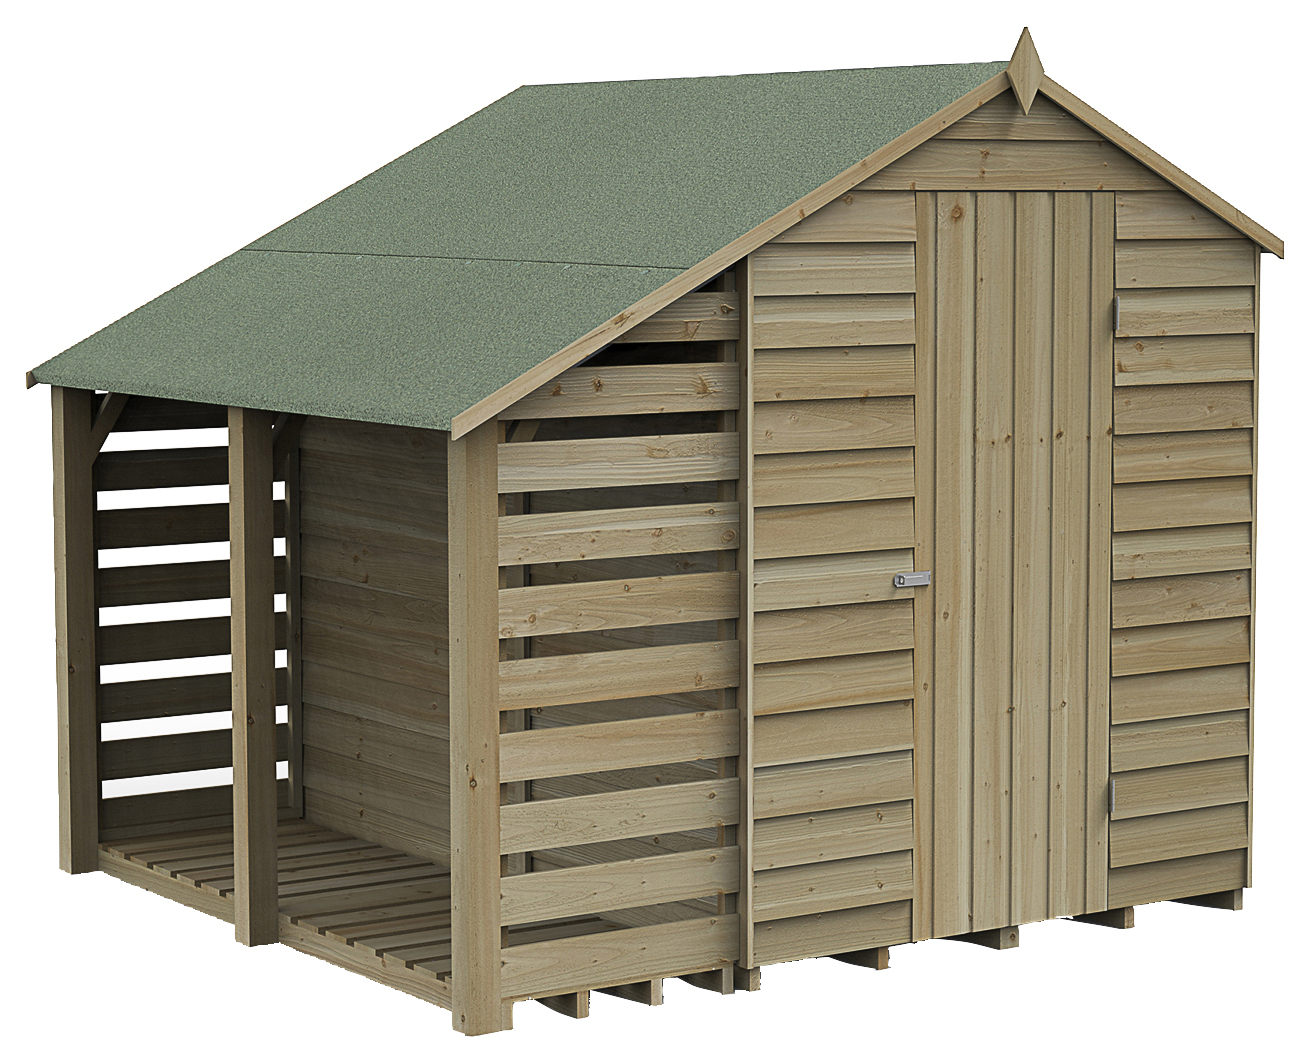 Image of Forest Garden 7 x 5ft 4Life Apex Overlap Pressure Treated Windowless Shed with Lean-To